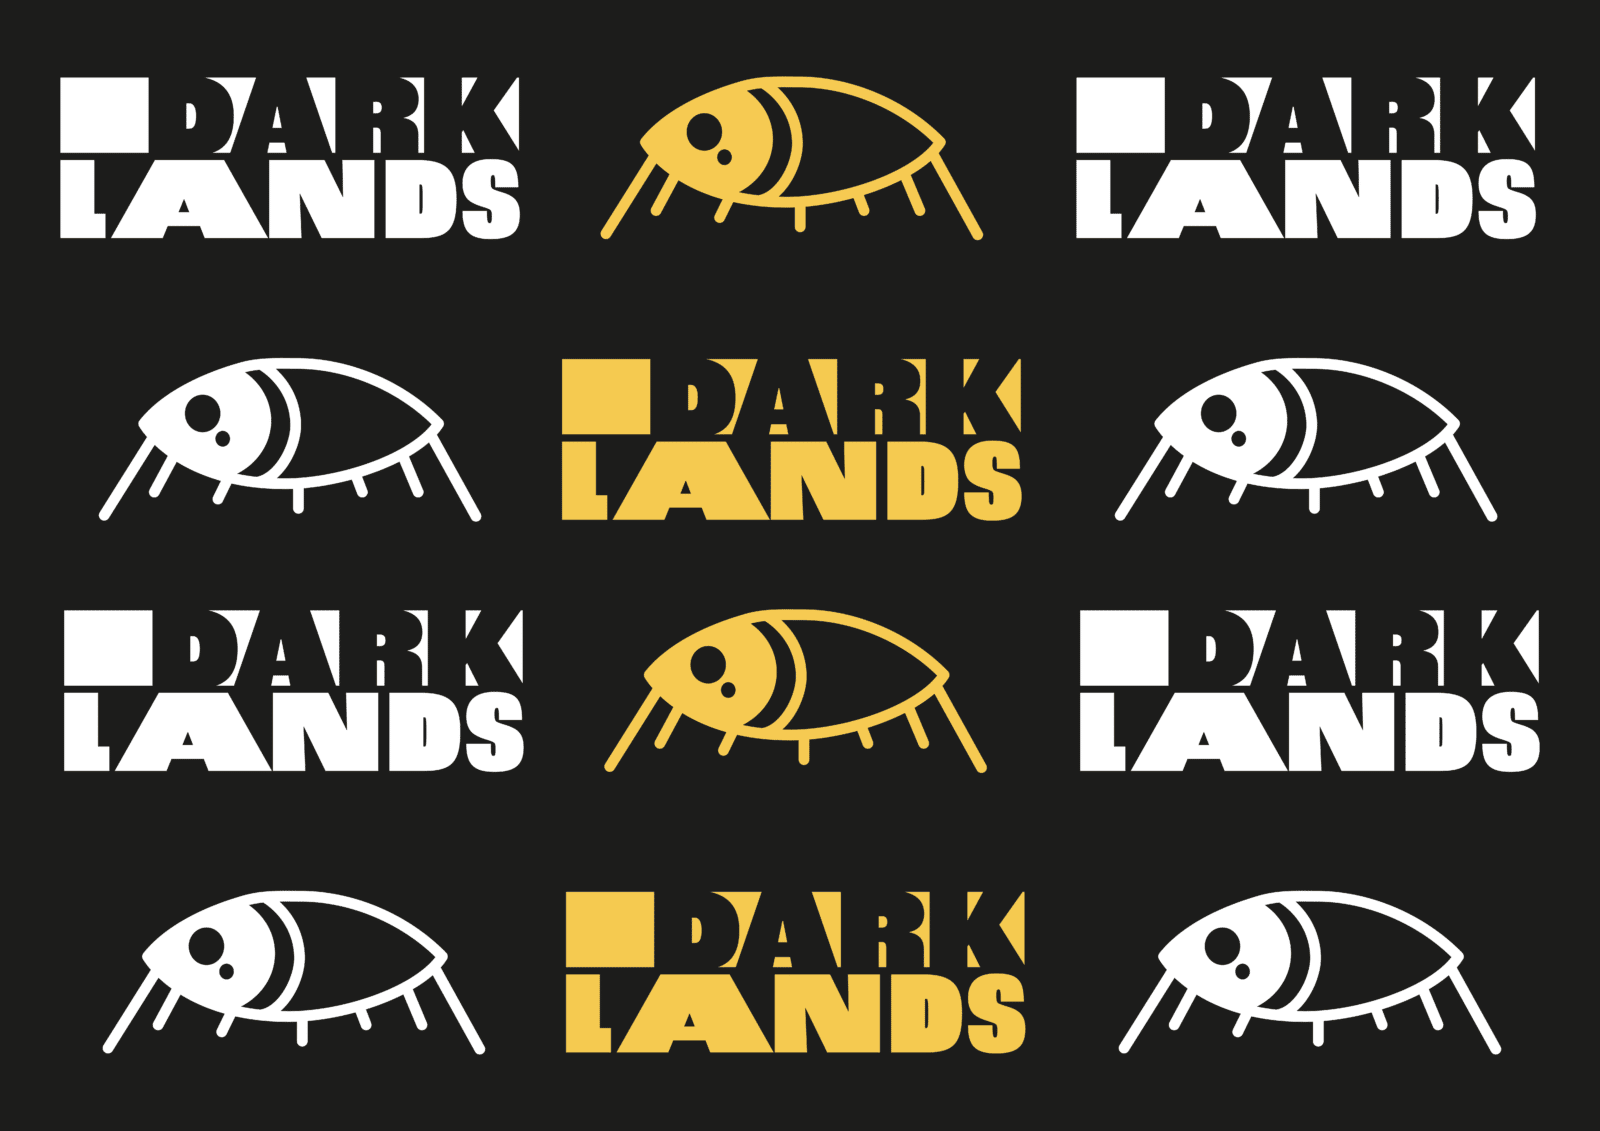 Three rows of logos, that read "Dark Lands" in white and yellow.